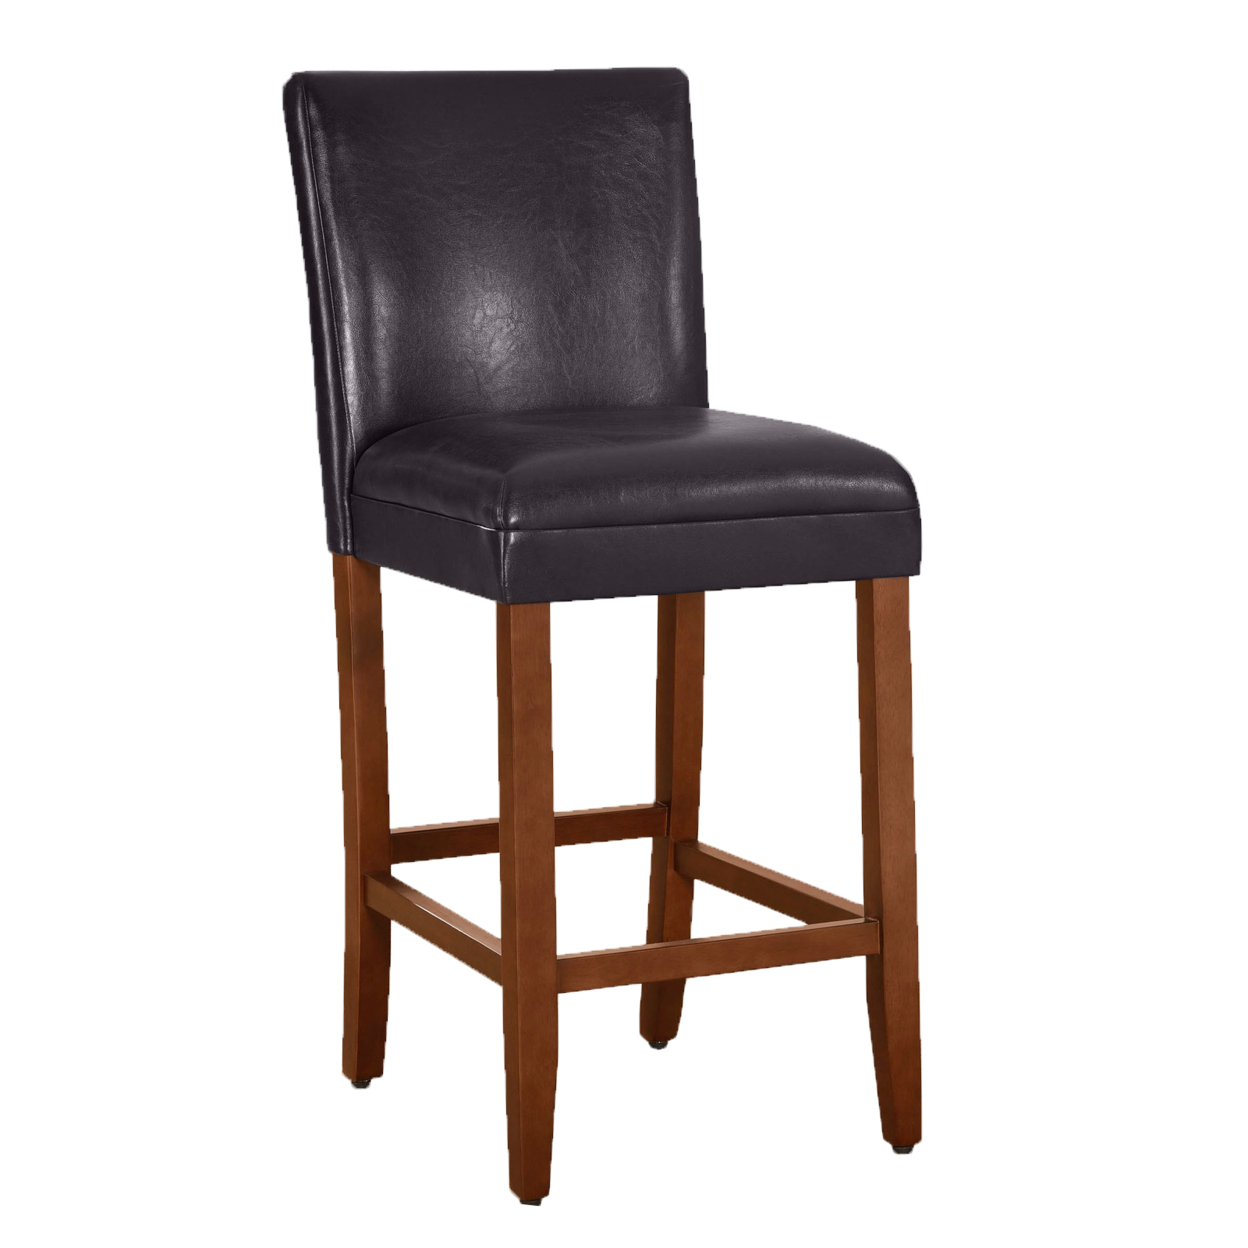 Leatherette Upholstered 29 Inch Wooden Bar Stool With Tapered Feet And Footrest, Brown And Black- Saltoro Sherpi